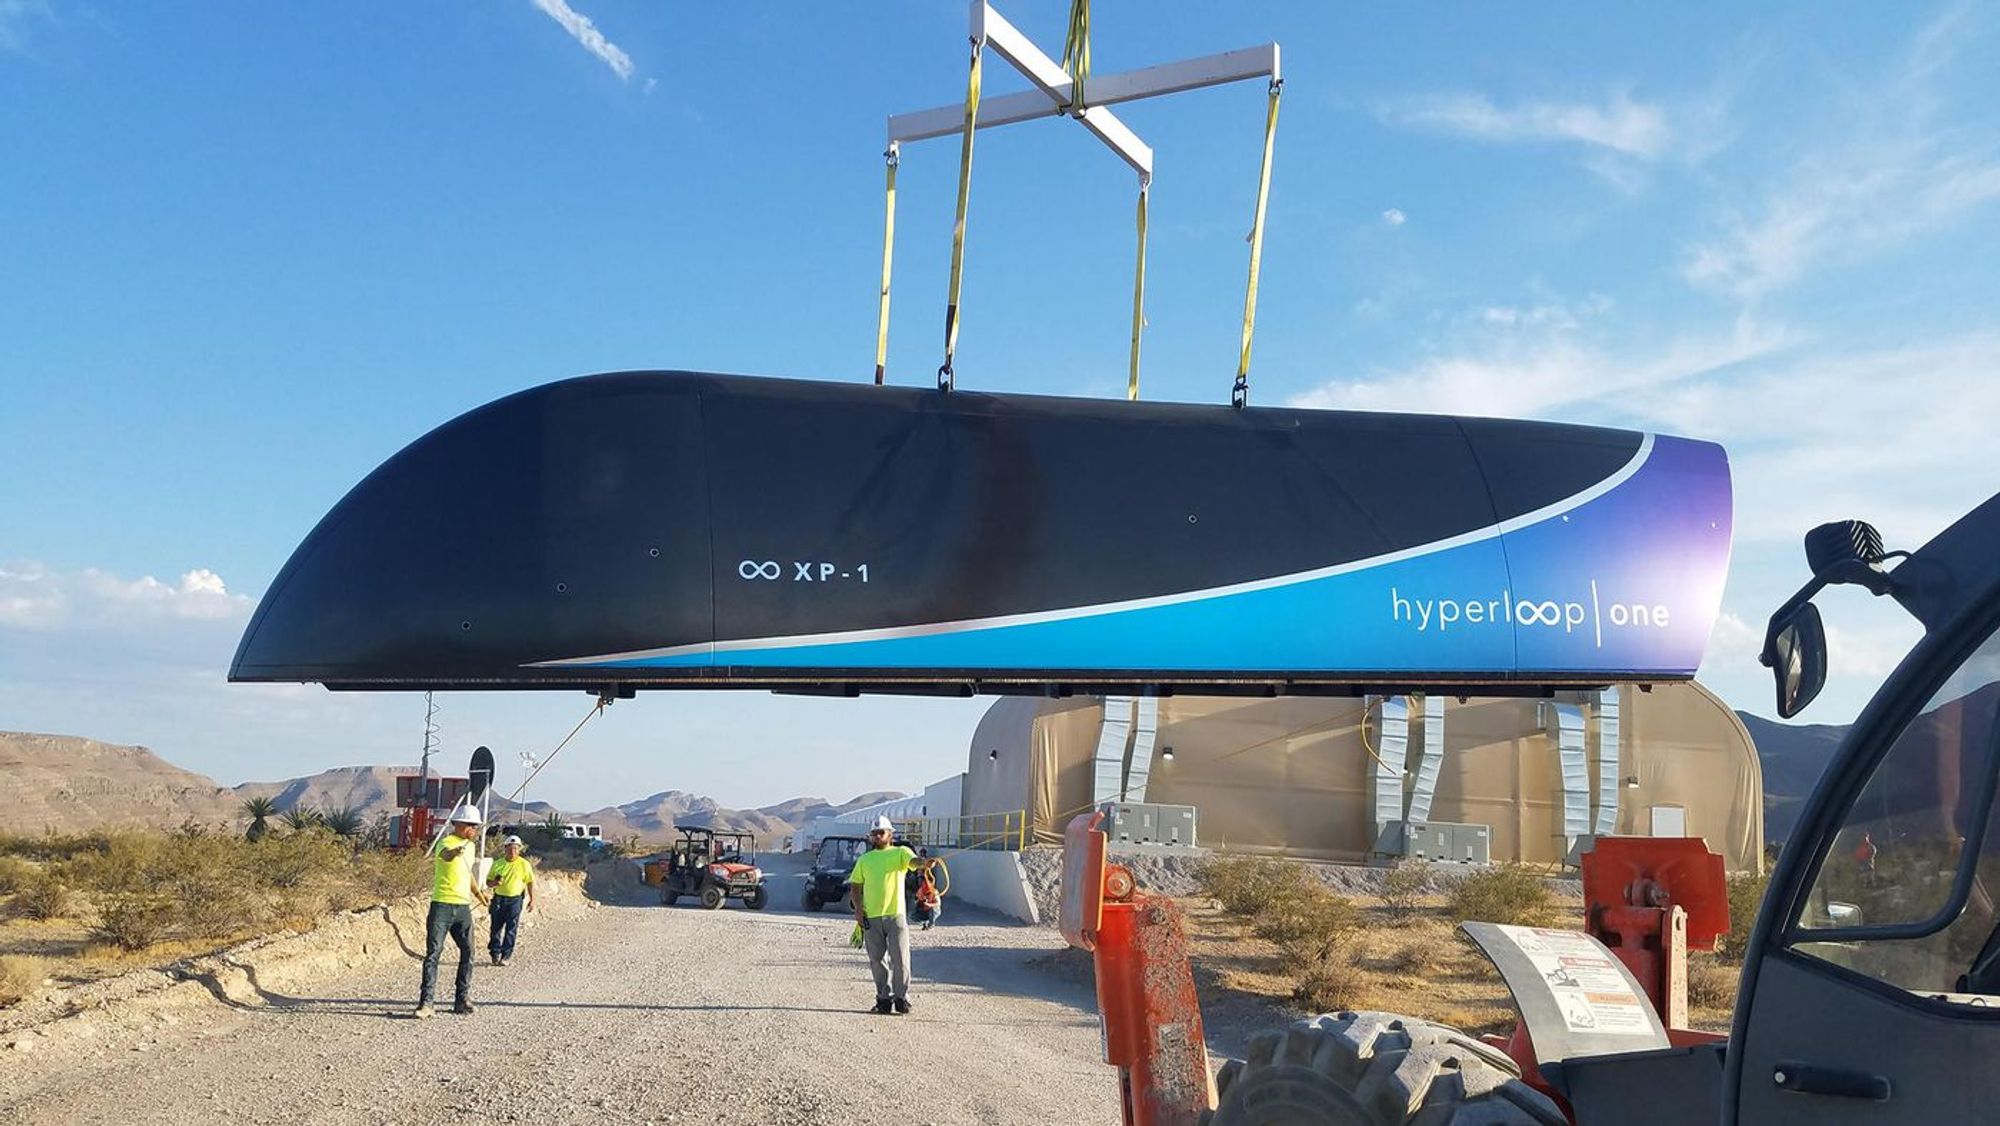 The hyperloop is dead for real this time